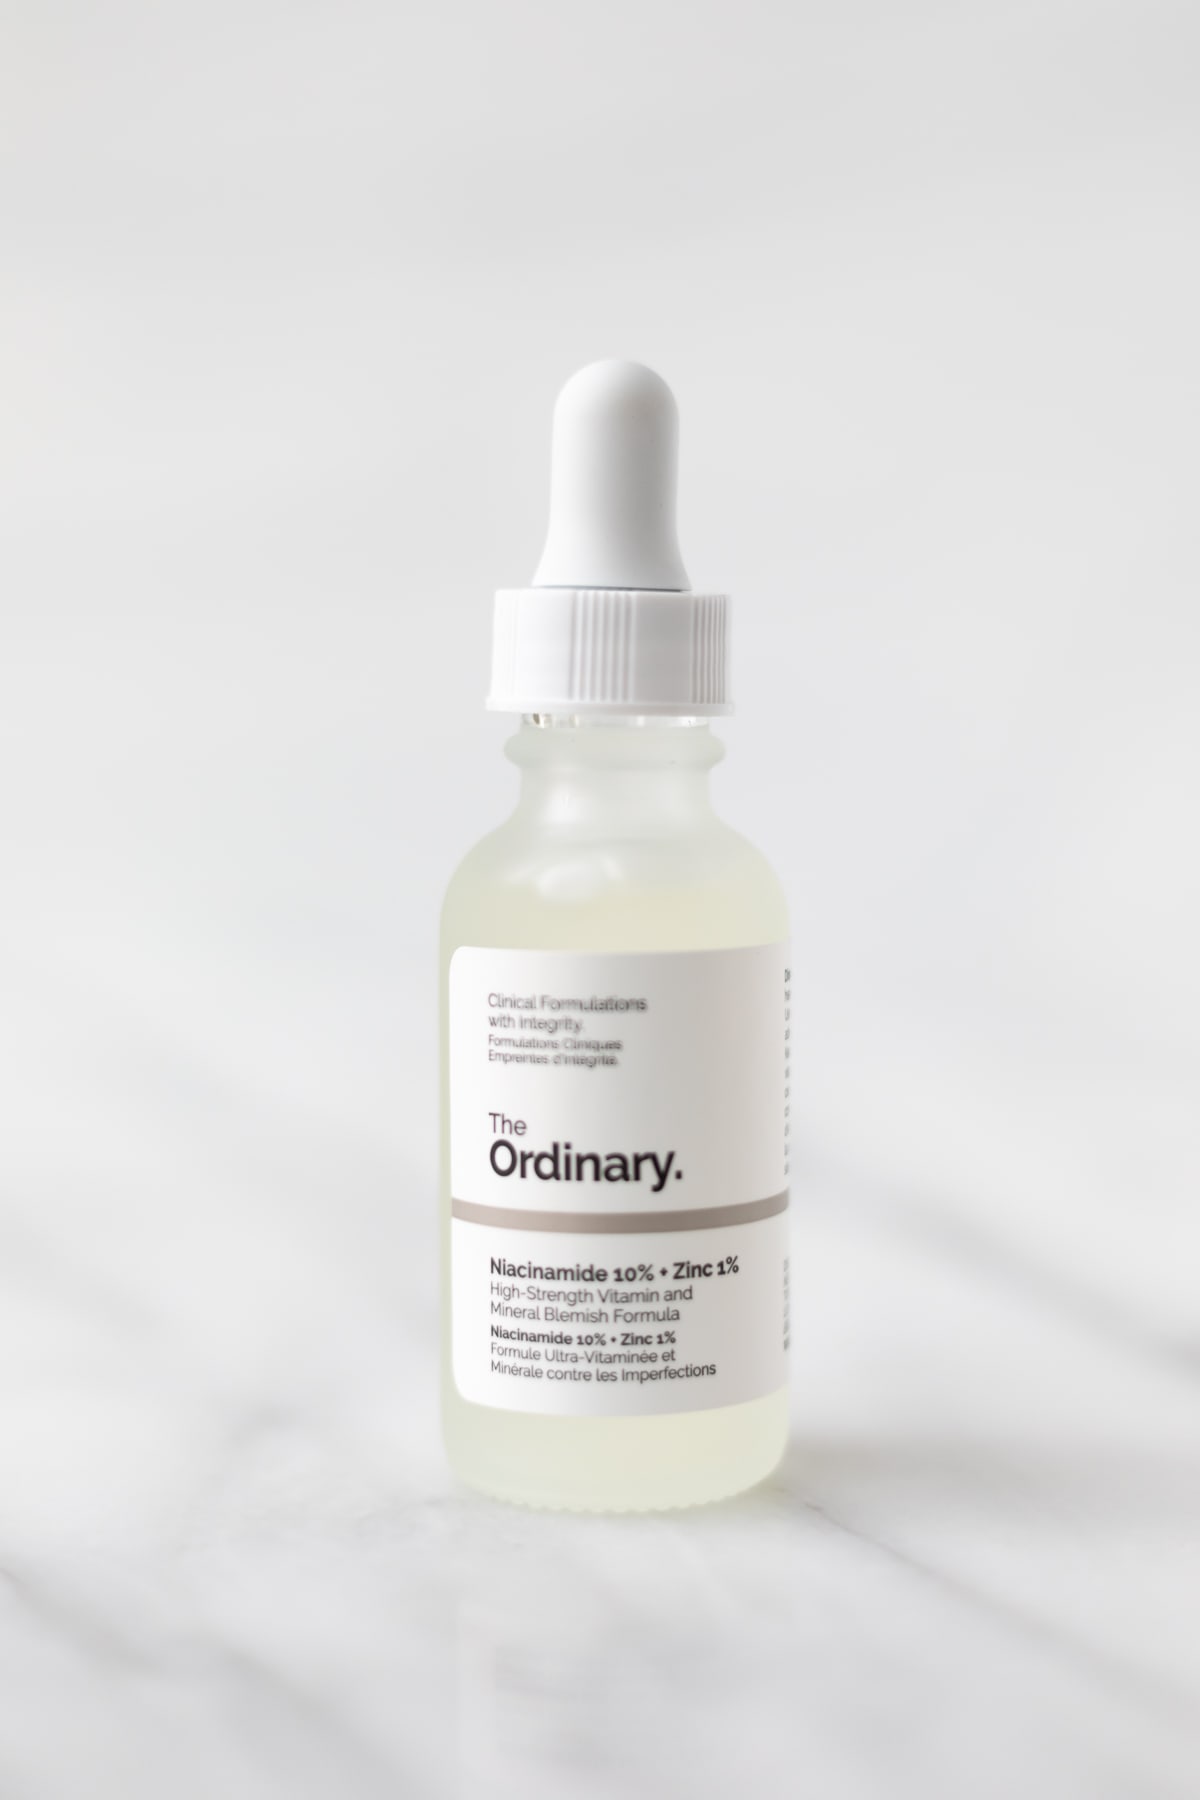 A bottle of The Ordinary Niacinamide 10% + Zinc 1% on a marble table.